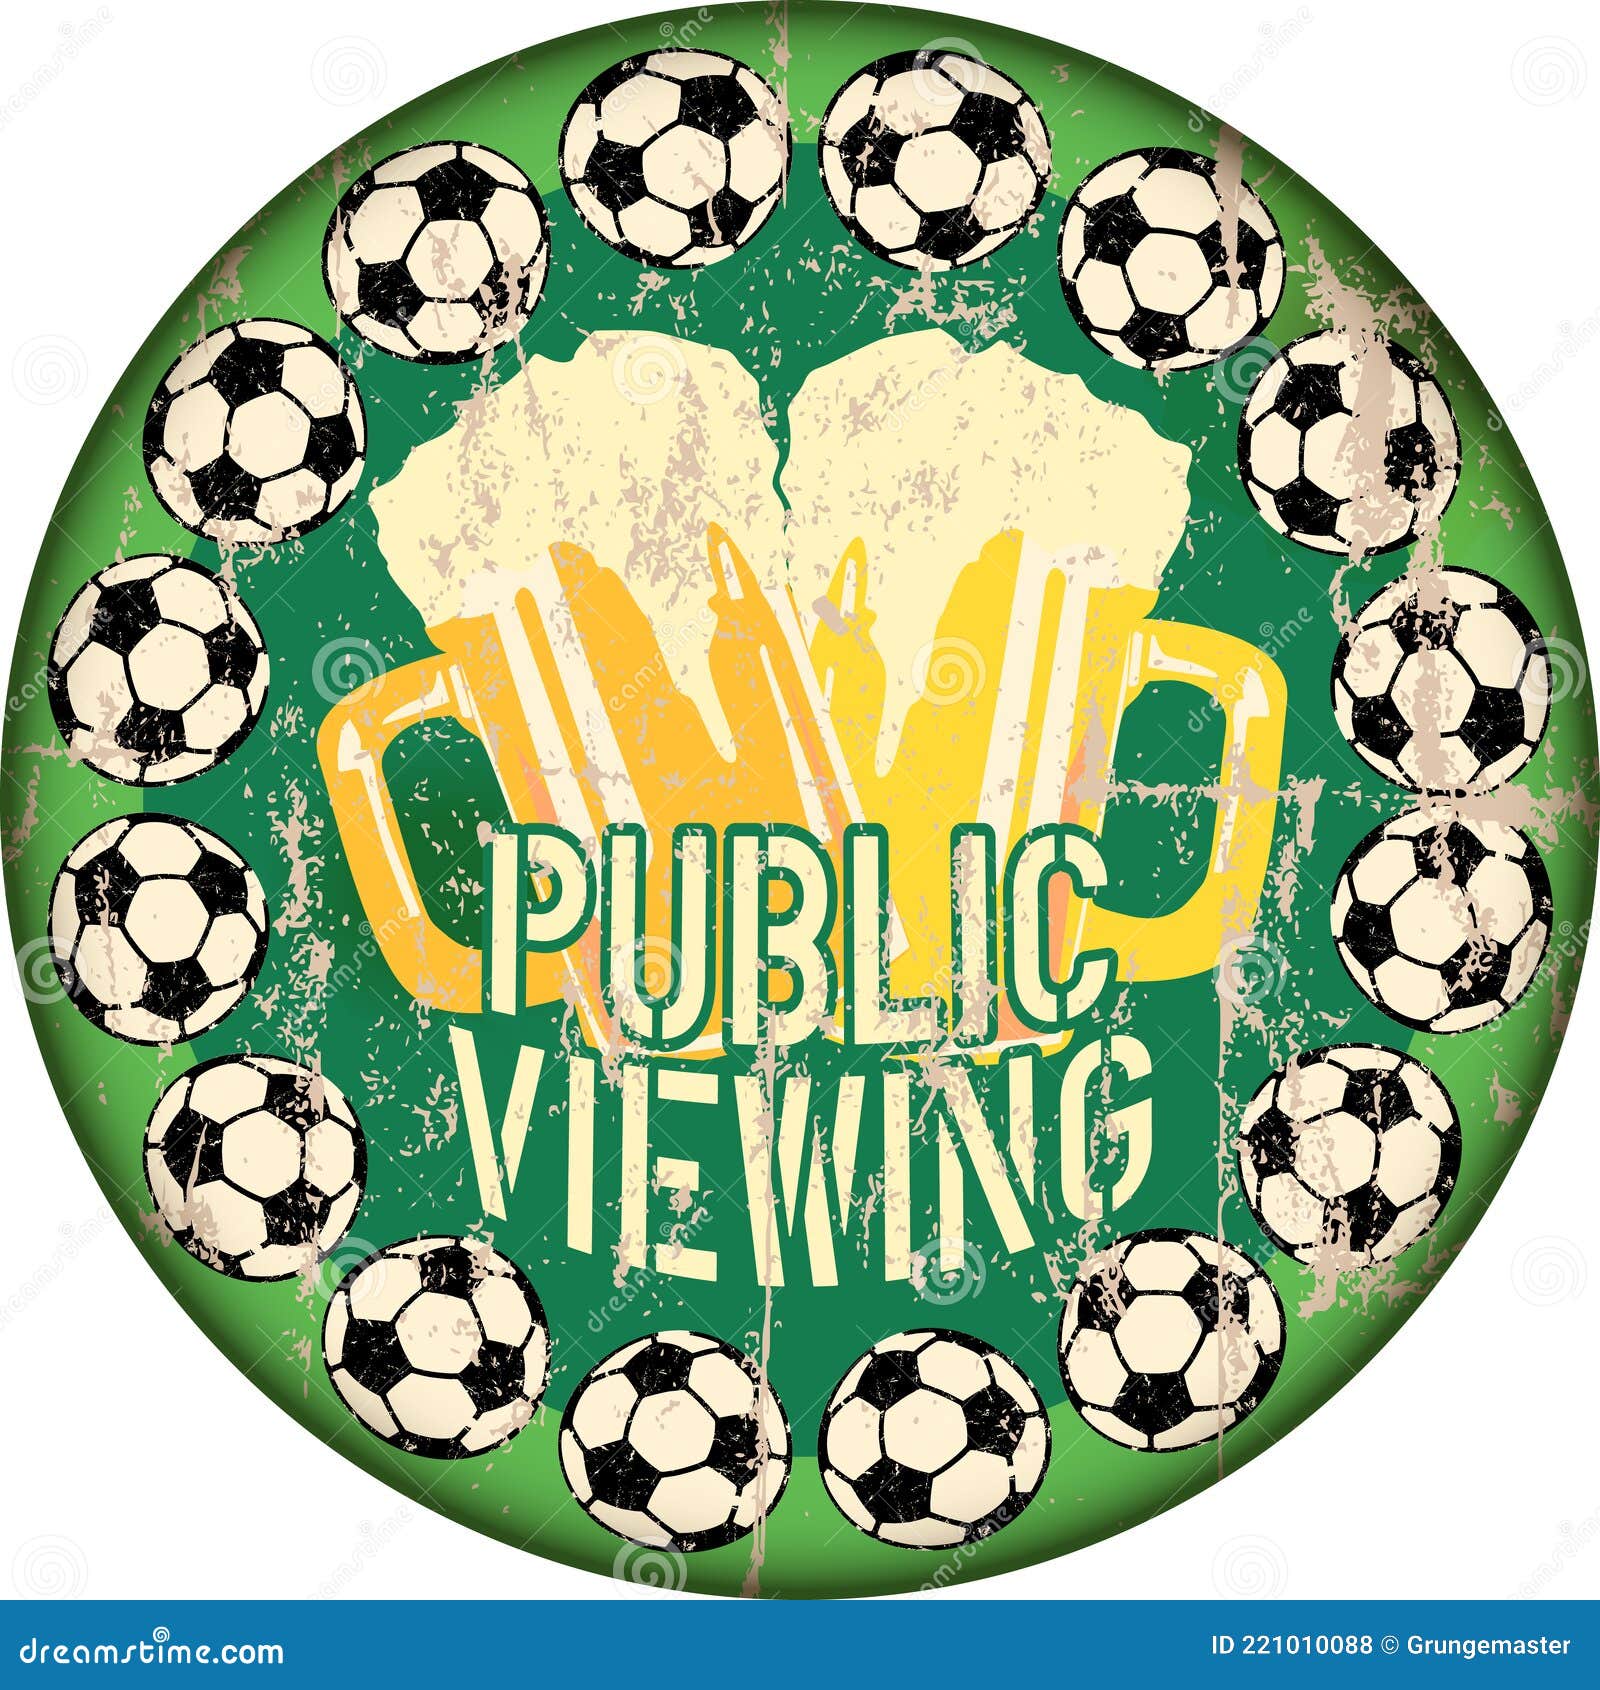 great soccer event this year, public viewing sign with soccer ball and beer, super grunge sign,